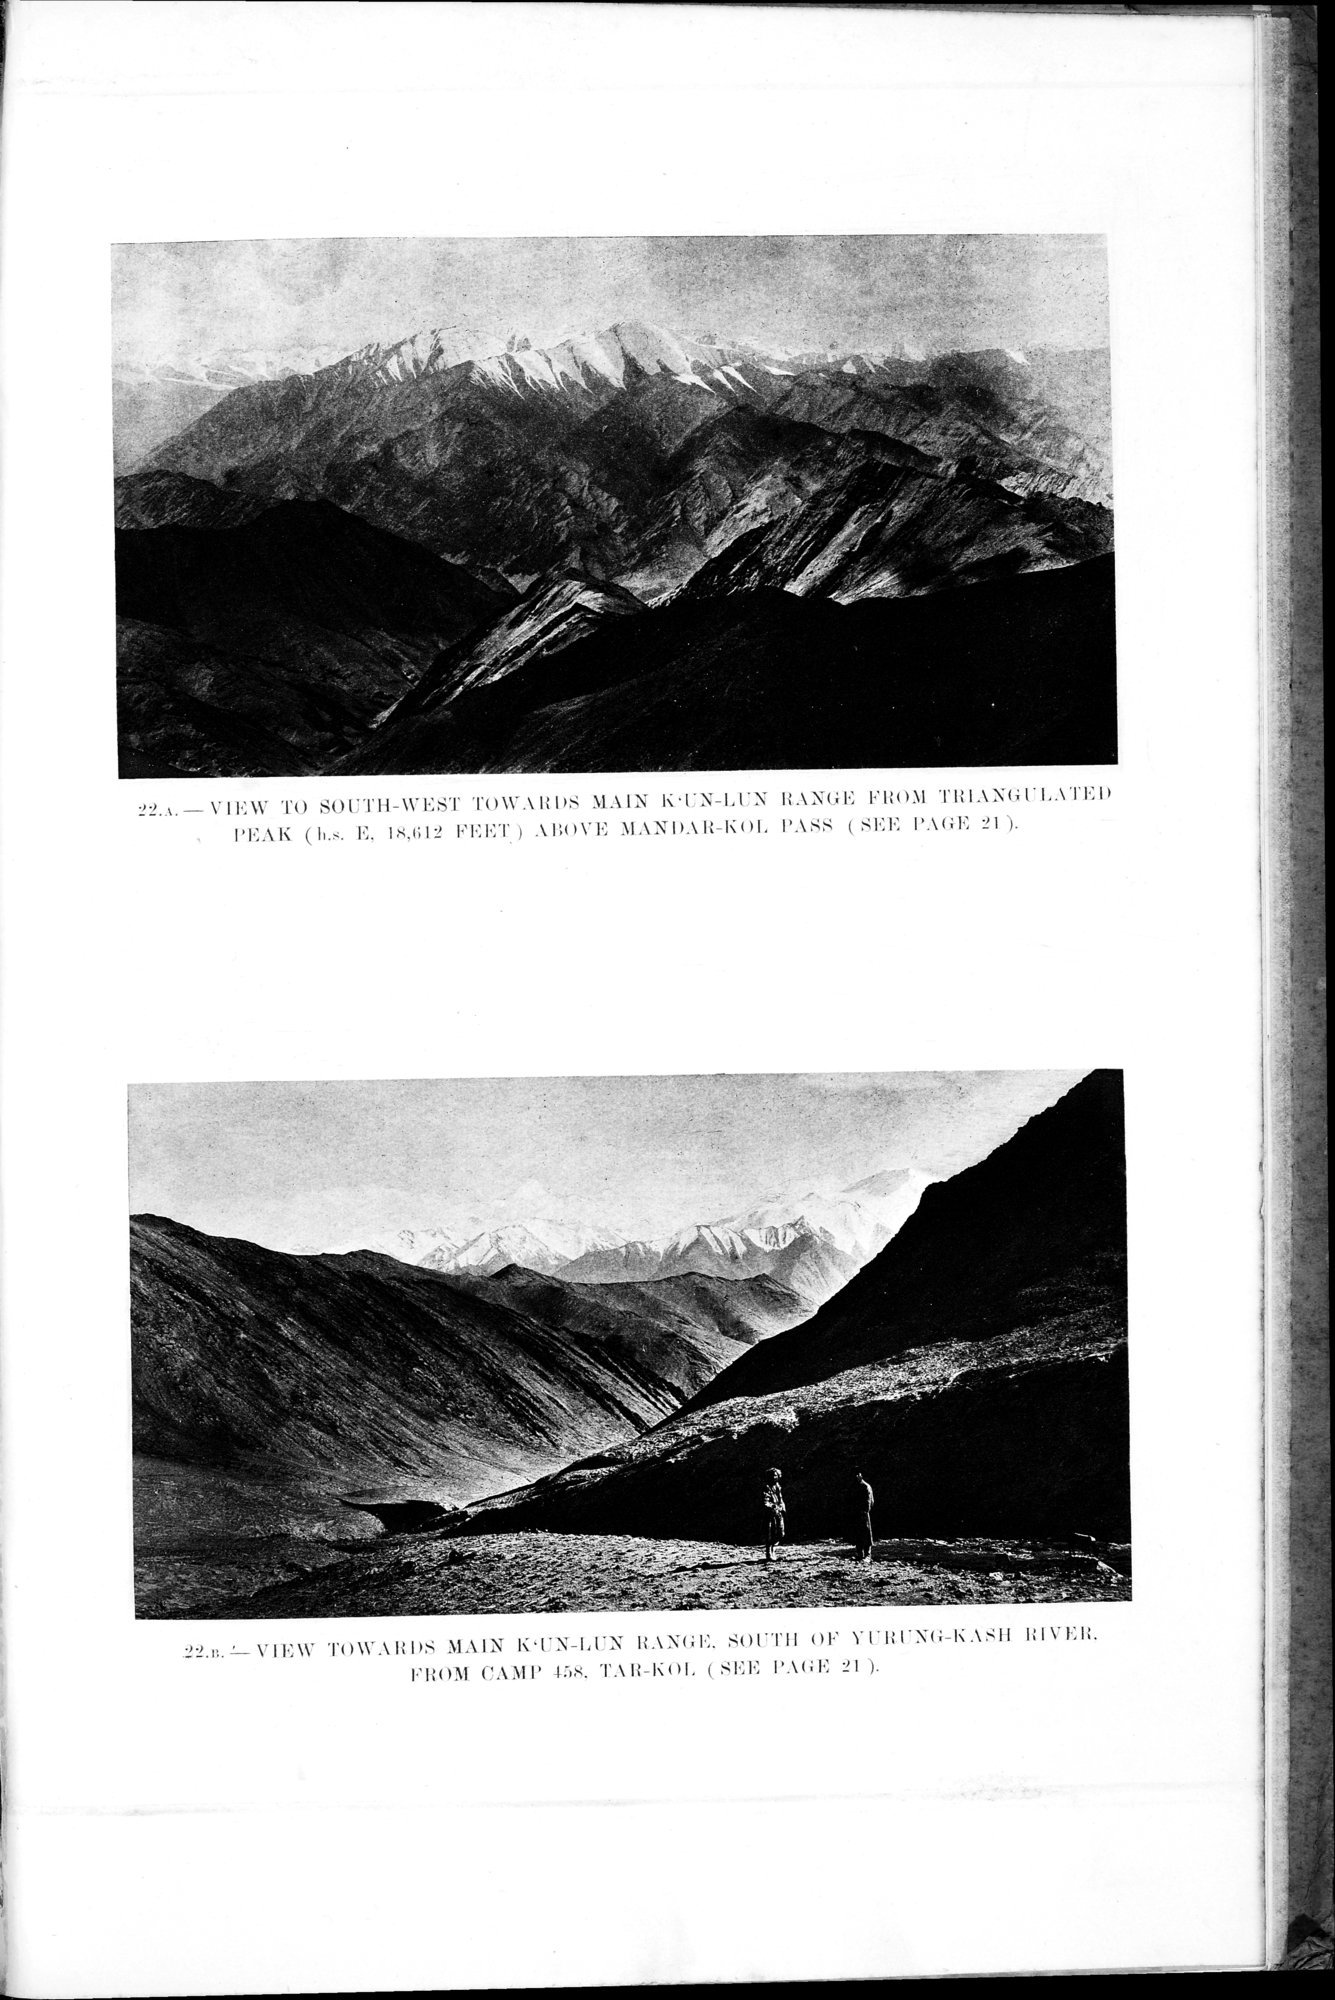 Memoir on Maps of Chinese Turkistan and Kansu : vol.1 / Page 275 (Grayscale High Resolution Image)